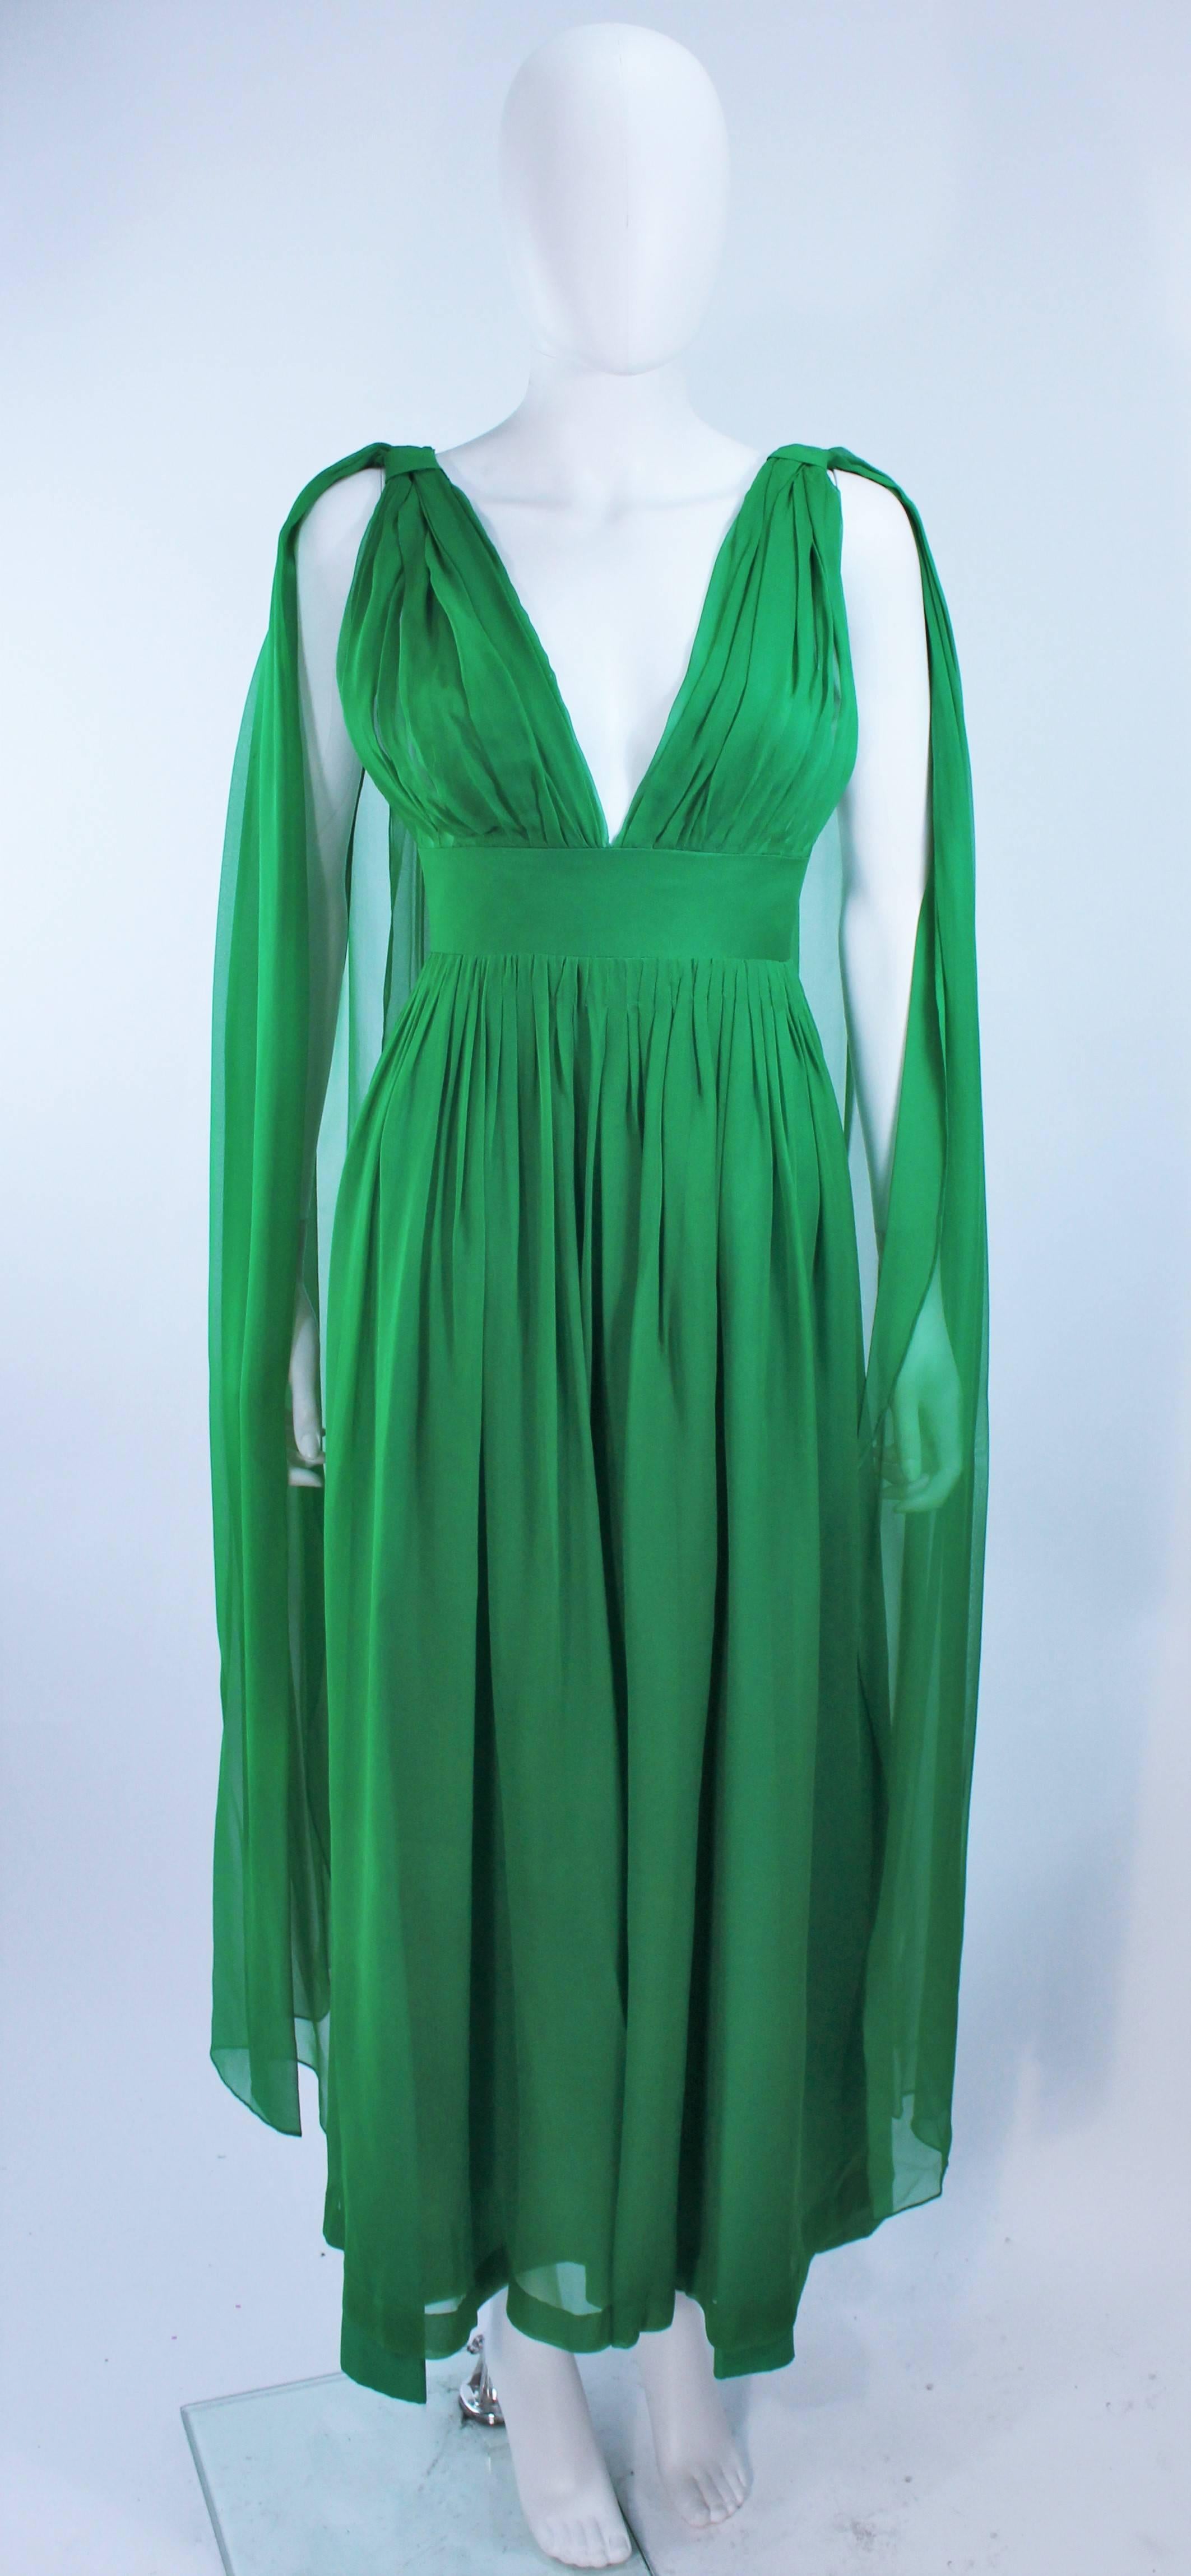 This gown is composed of  green chiffon. Features a gathered bust with draped shoulder details. There is a center back zipper closure. In excellent vintage condition.

**Please cross-reference measurements for personal accuracy. Size in